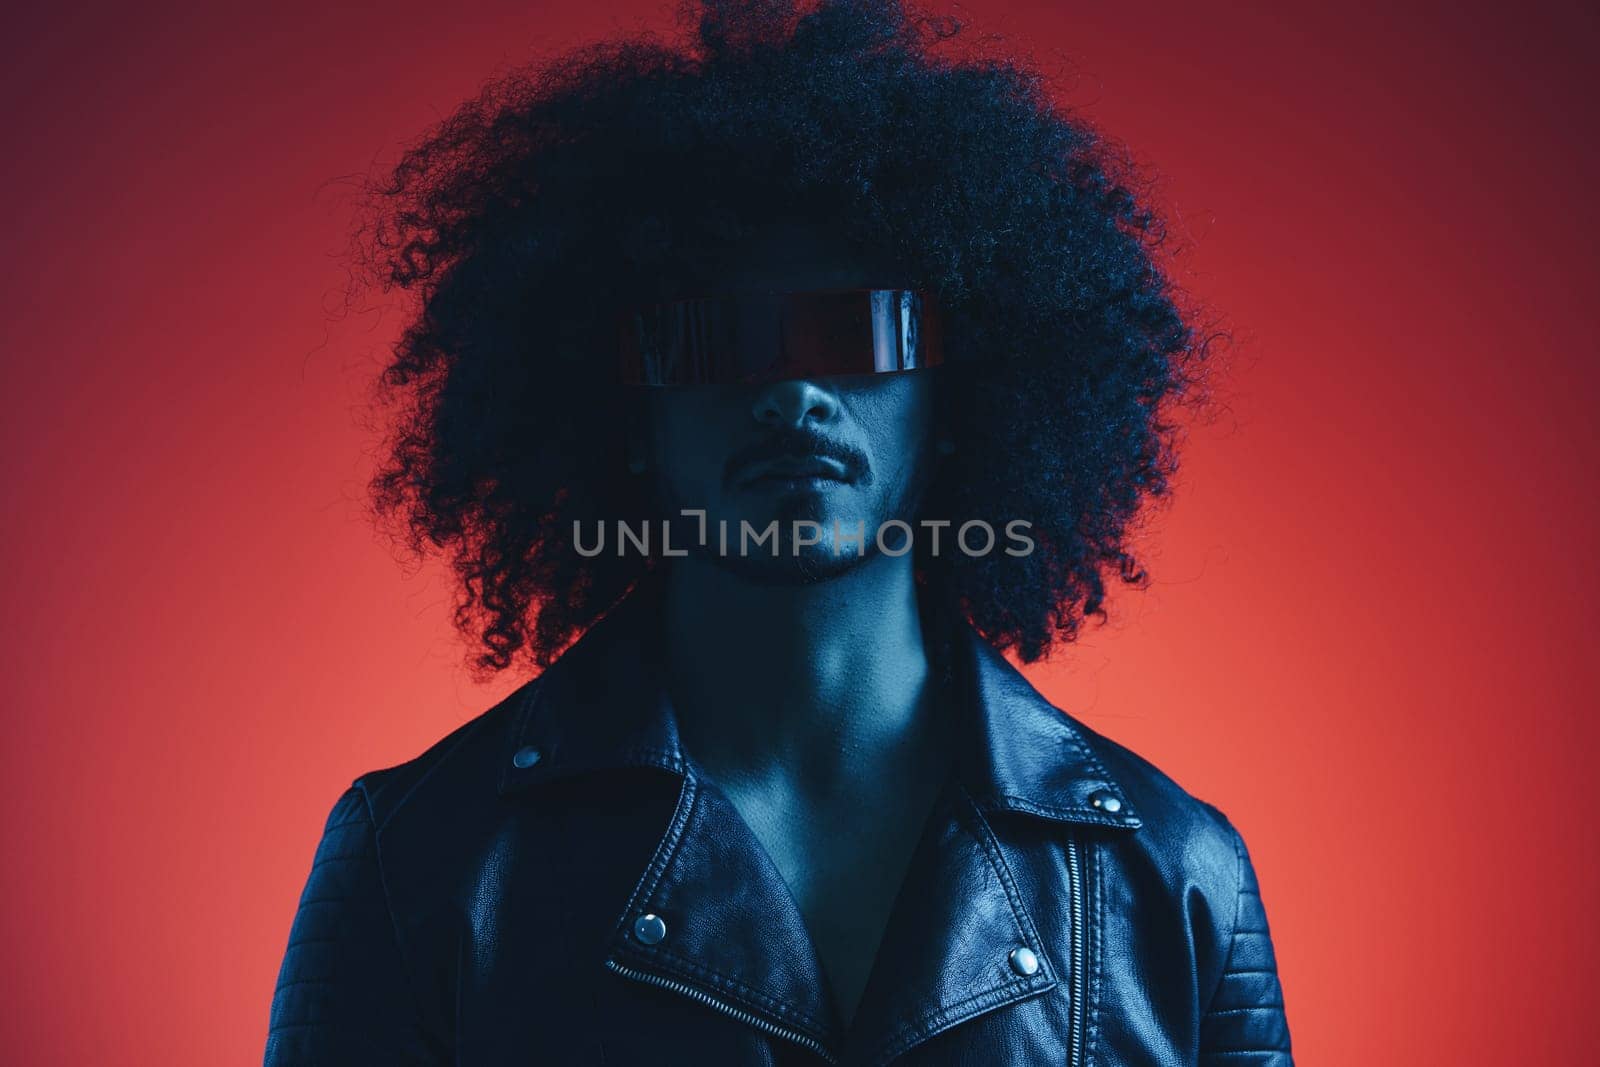 Portrait of fashion man with curly hair on red background with stylish glasses, multicultural, colored light, black leather jacket trend, modern concept. High quality photo